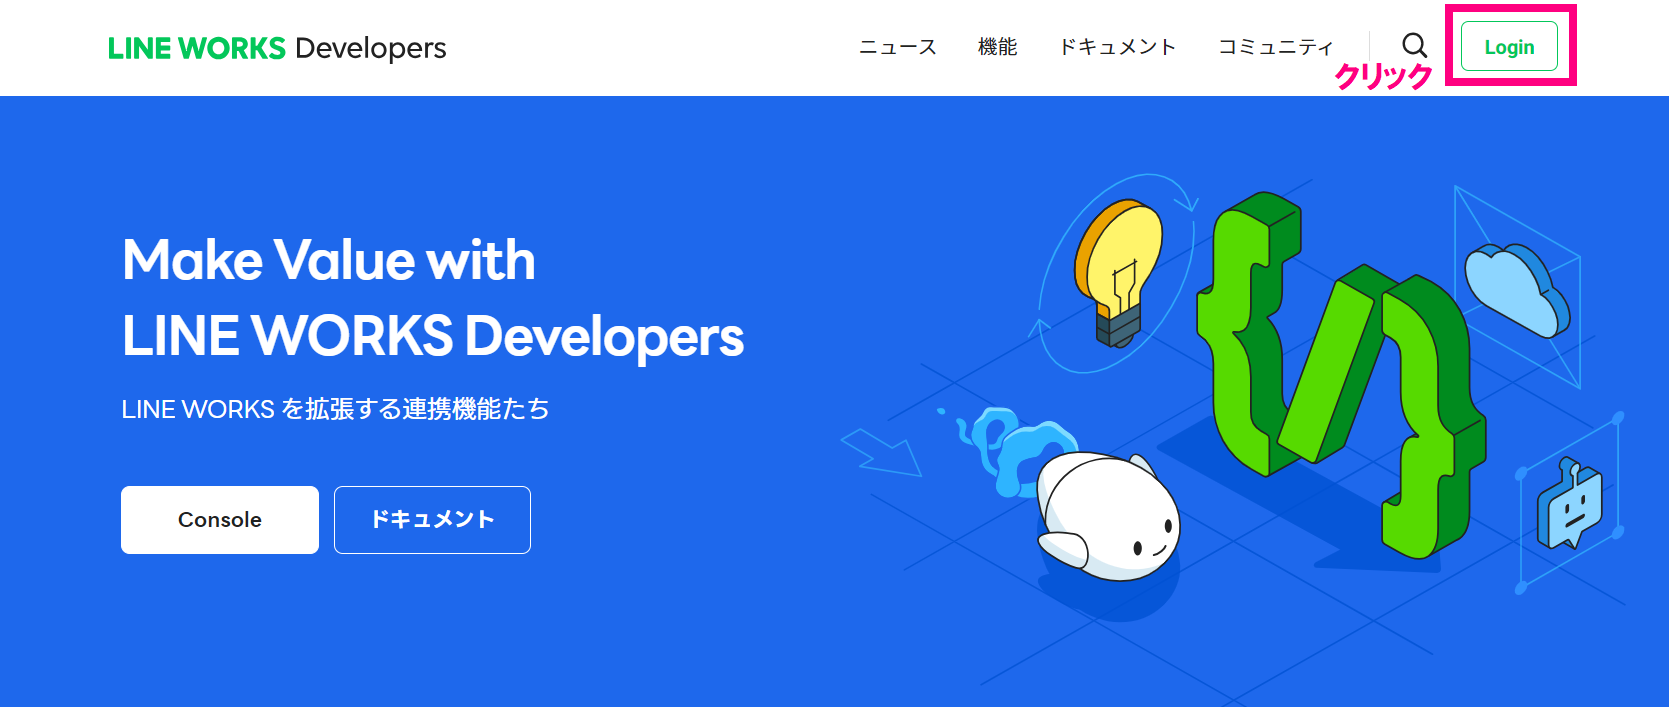 LINE WORKS Developersログイン.png